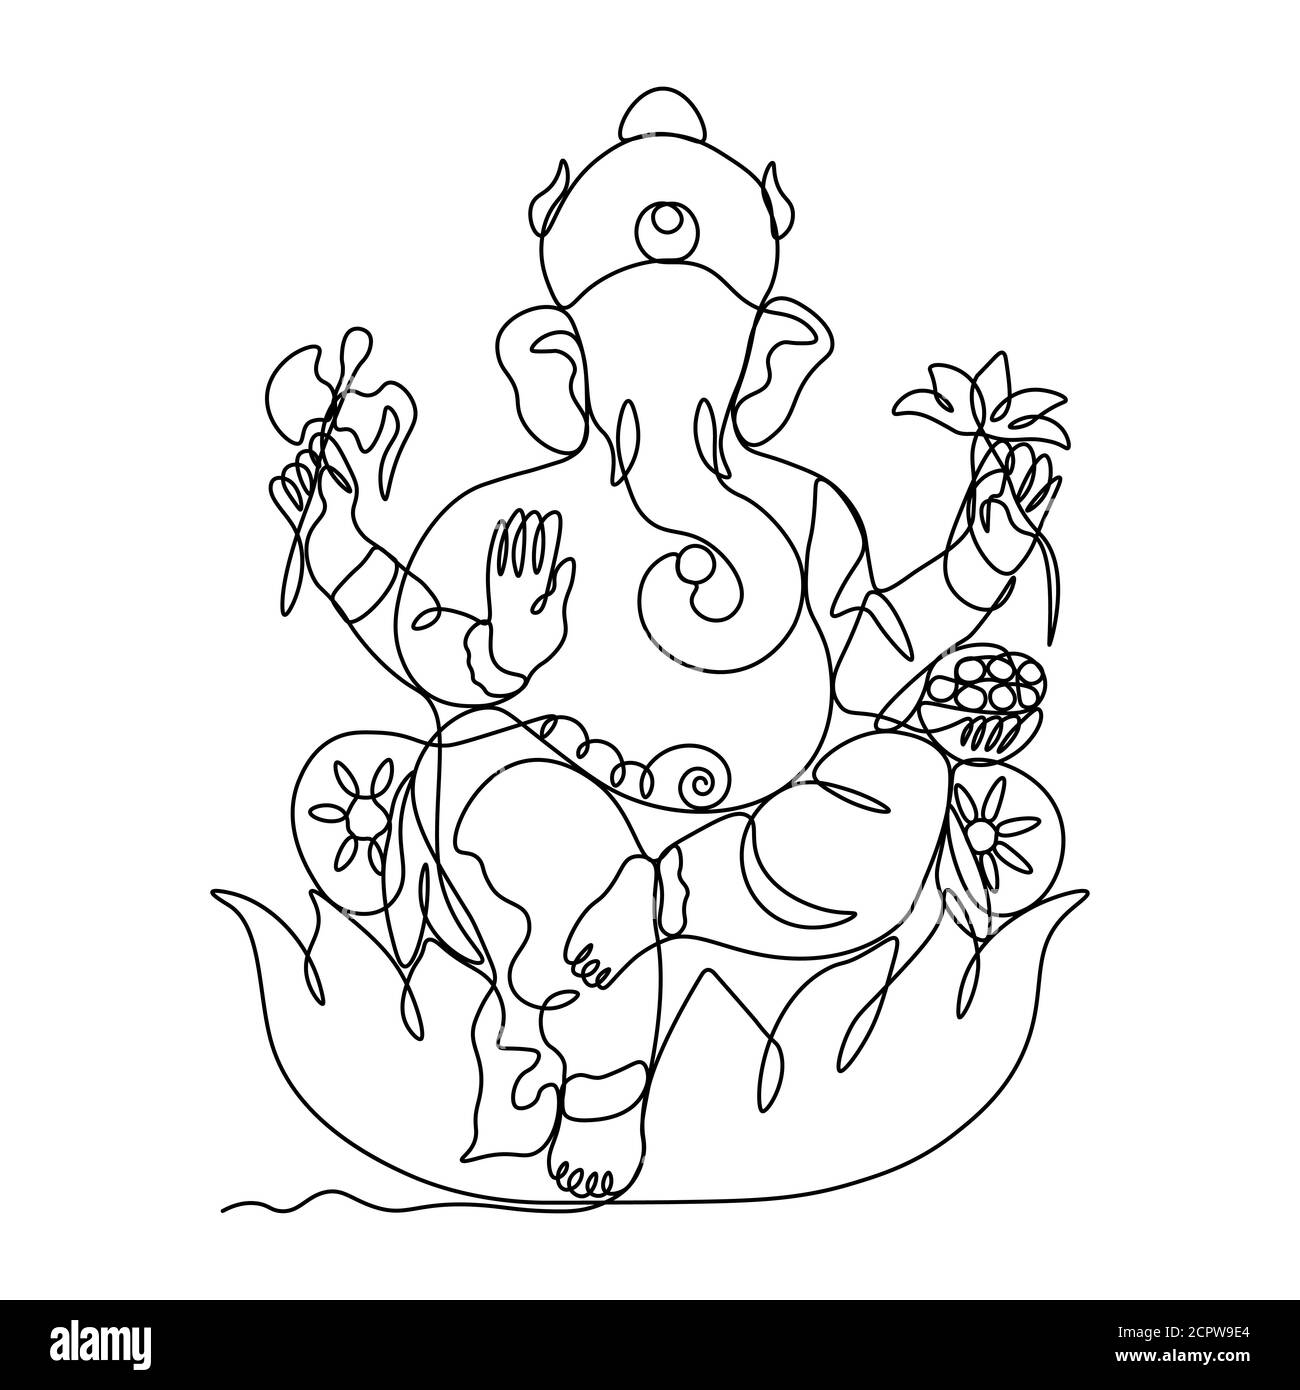 One continuous single drawn line art doodle spirituality happy ganesh indian culture .Isolated image of a hand drawn outline on a white background... Stock Vector